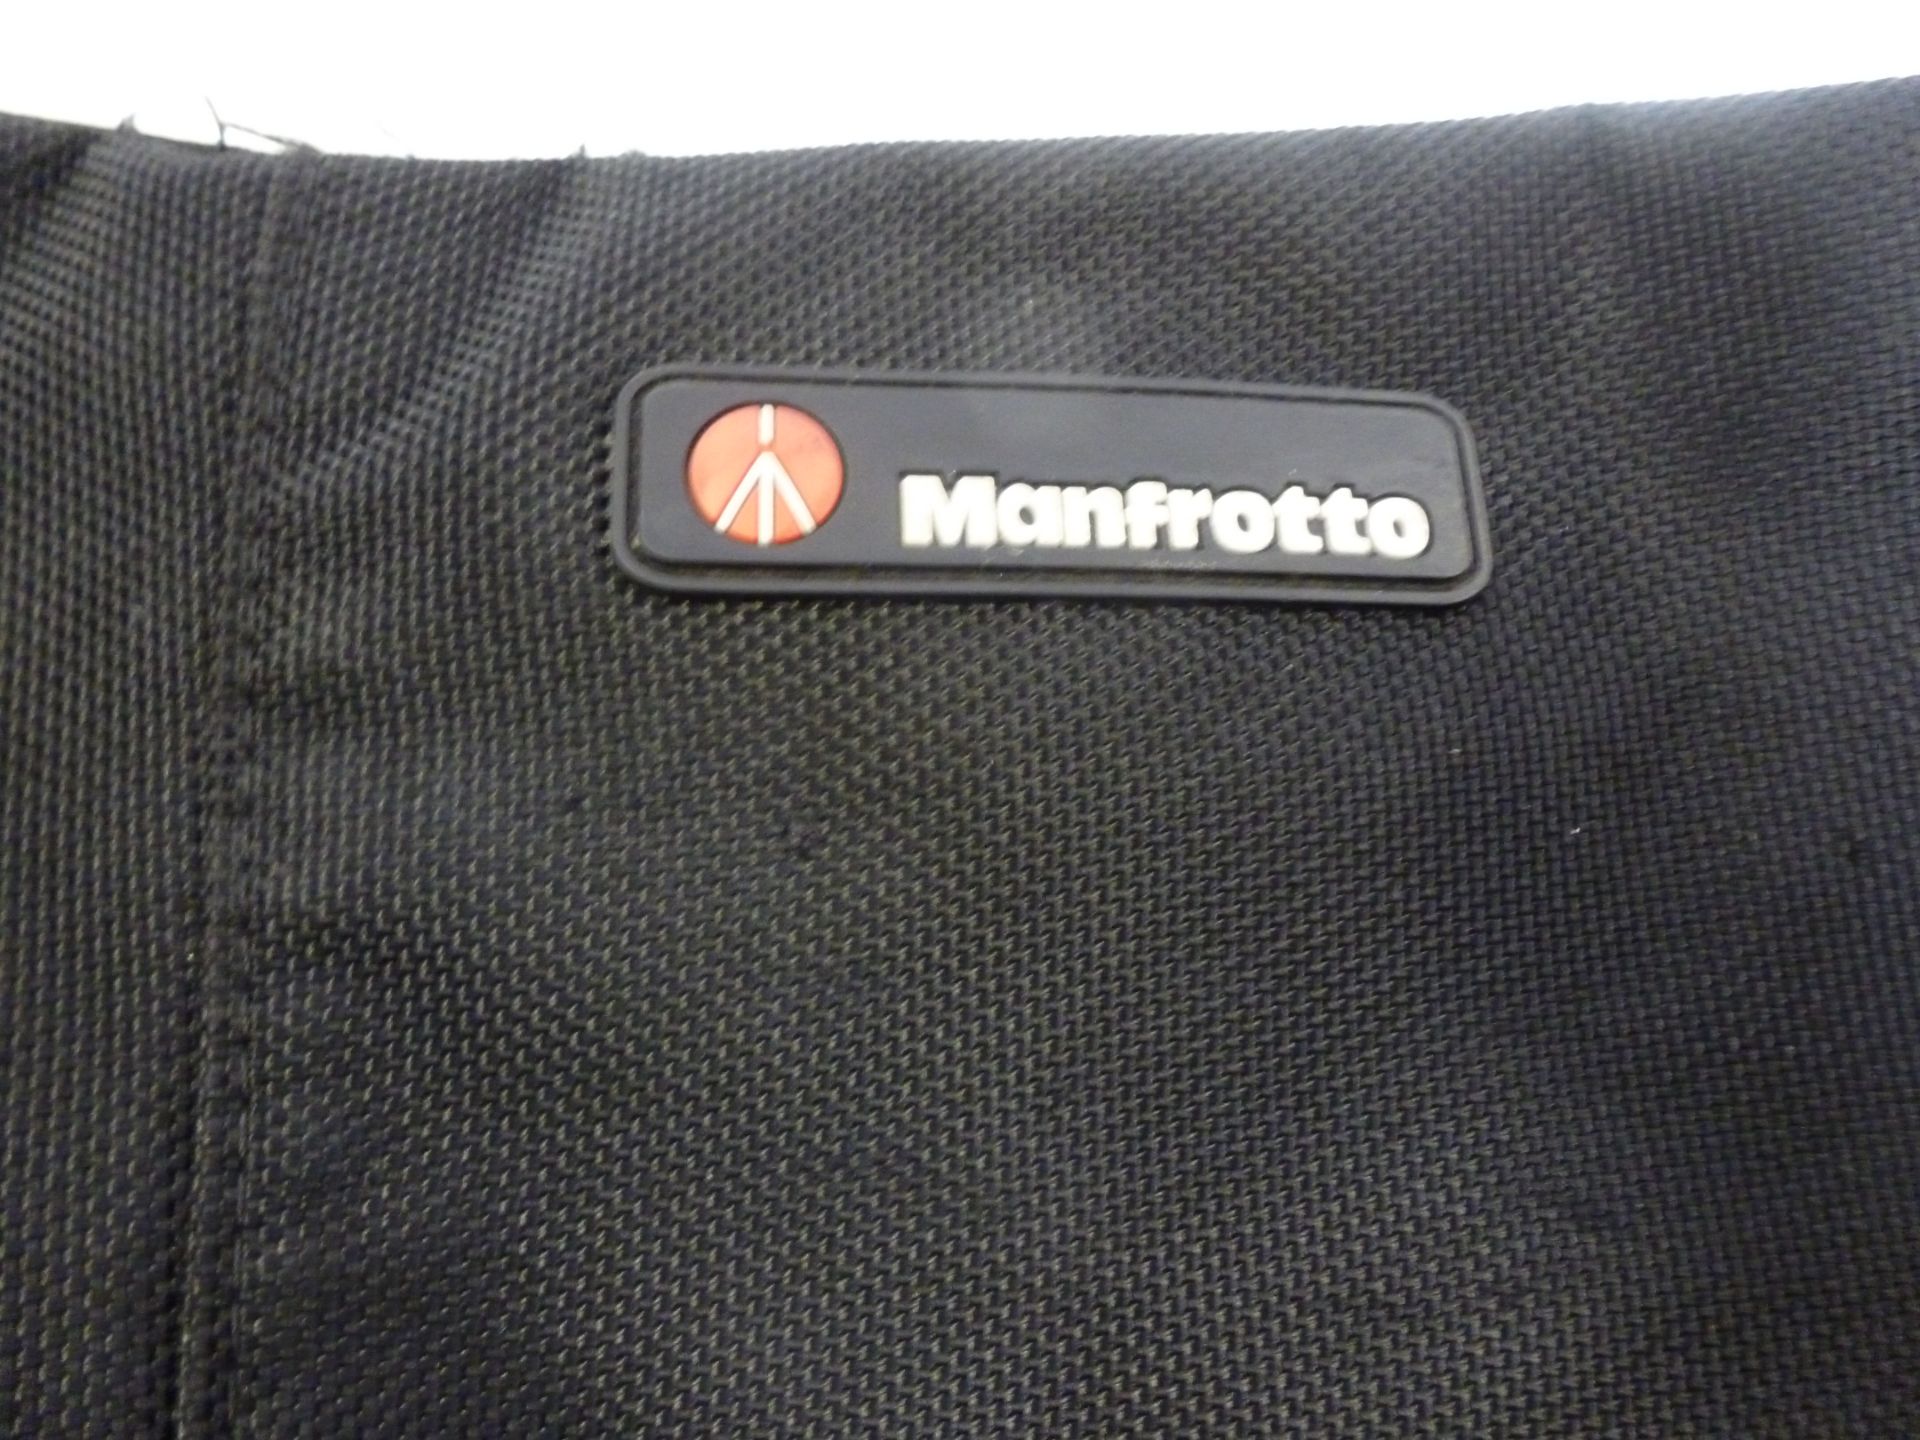 Manfrotto MBAG80 Camera Tripod Bag - Image 2 of 3